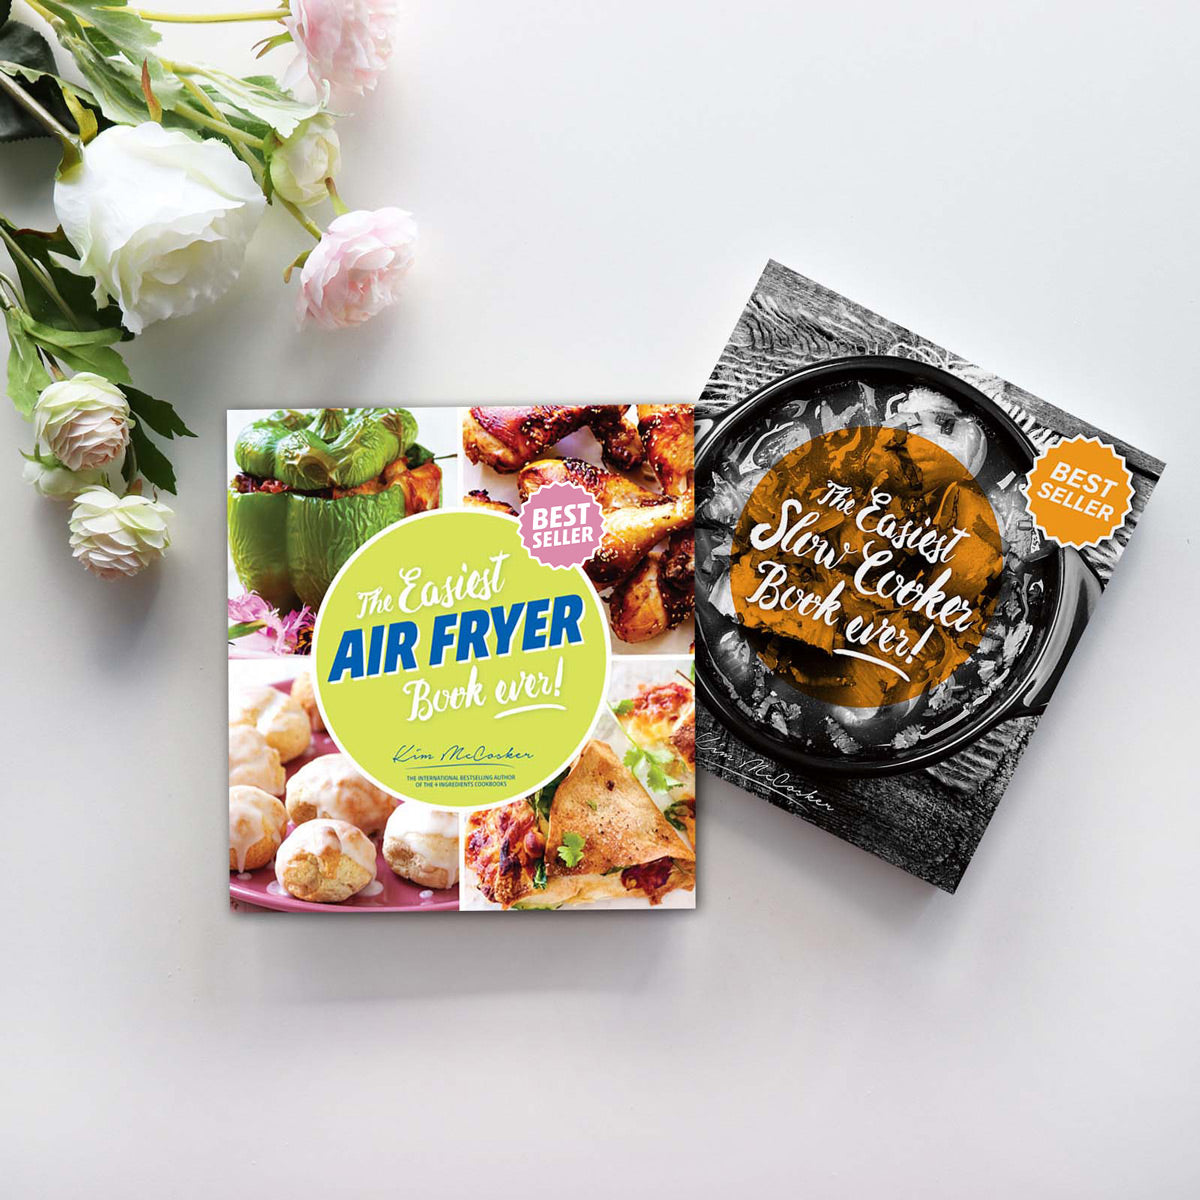 The Easiest Slow Cooker Book ever + The Easiest Air Fryer Book ever